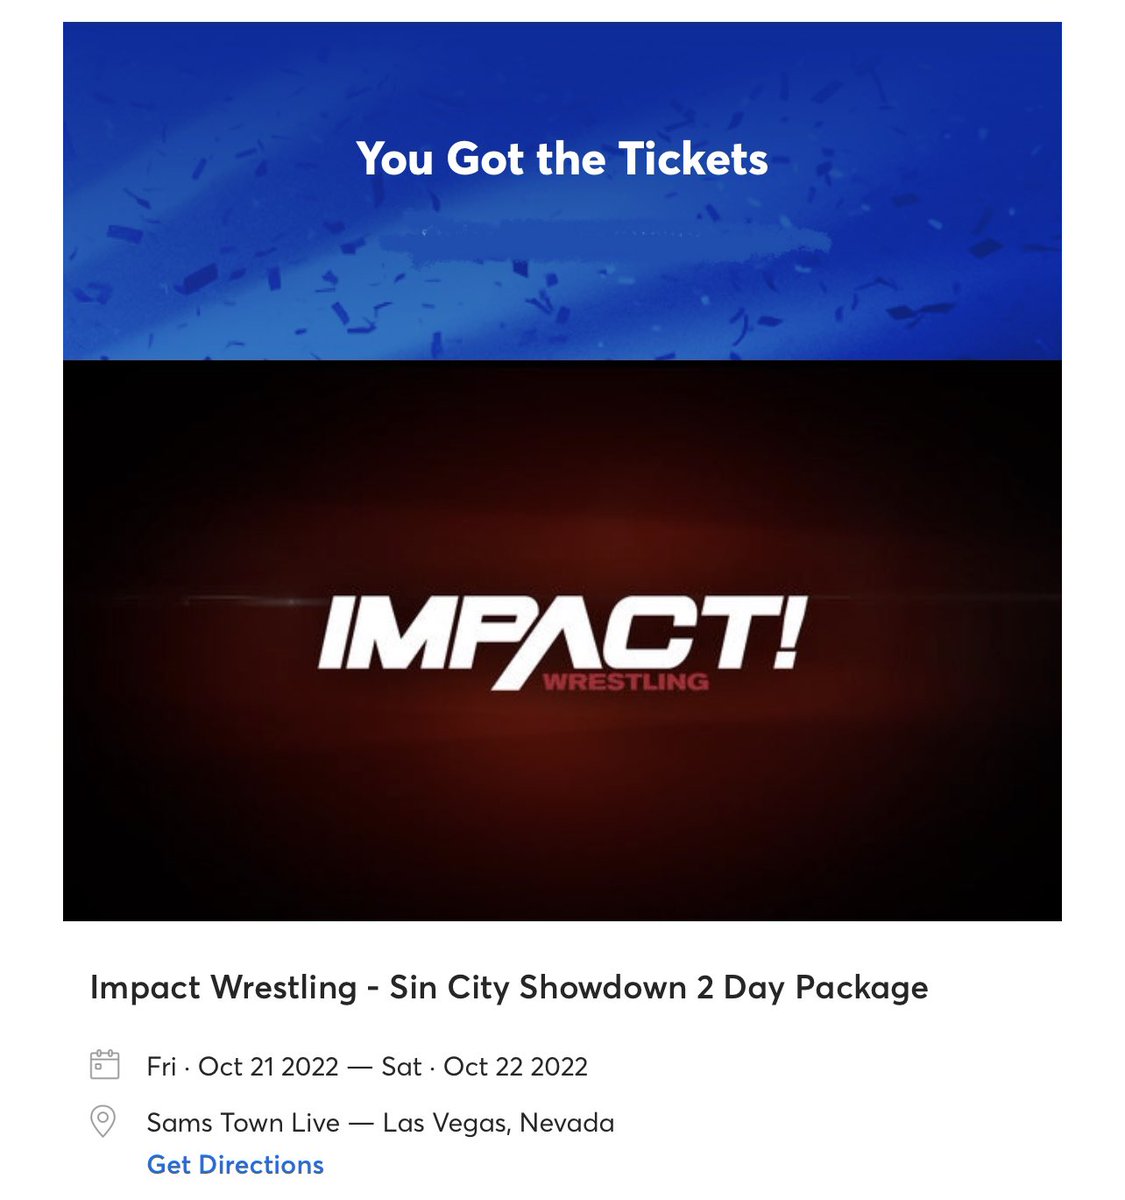 I completely almost forgot about @IMPACTWRESTLING tickets for #SinCityShowdown in Vegas. Luckily it didn’t sell out but good to see that it’s selling well. Lets GO!